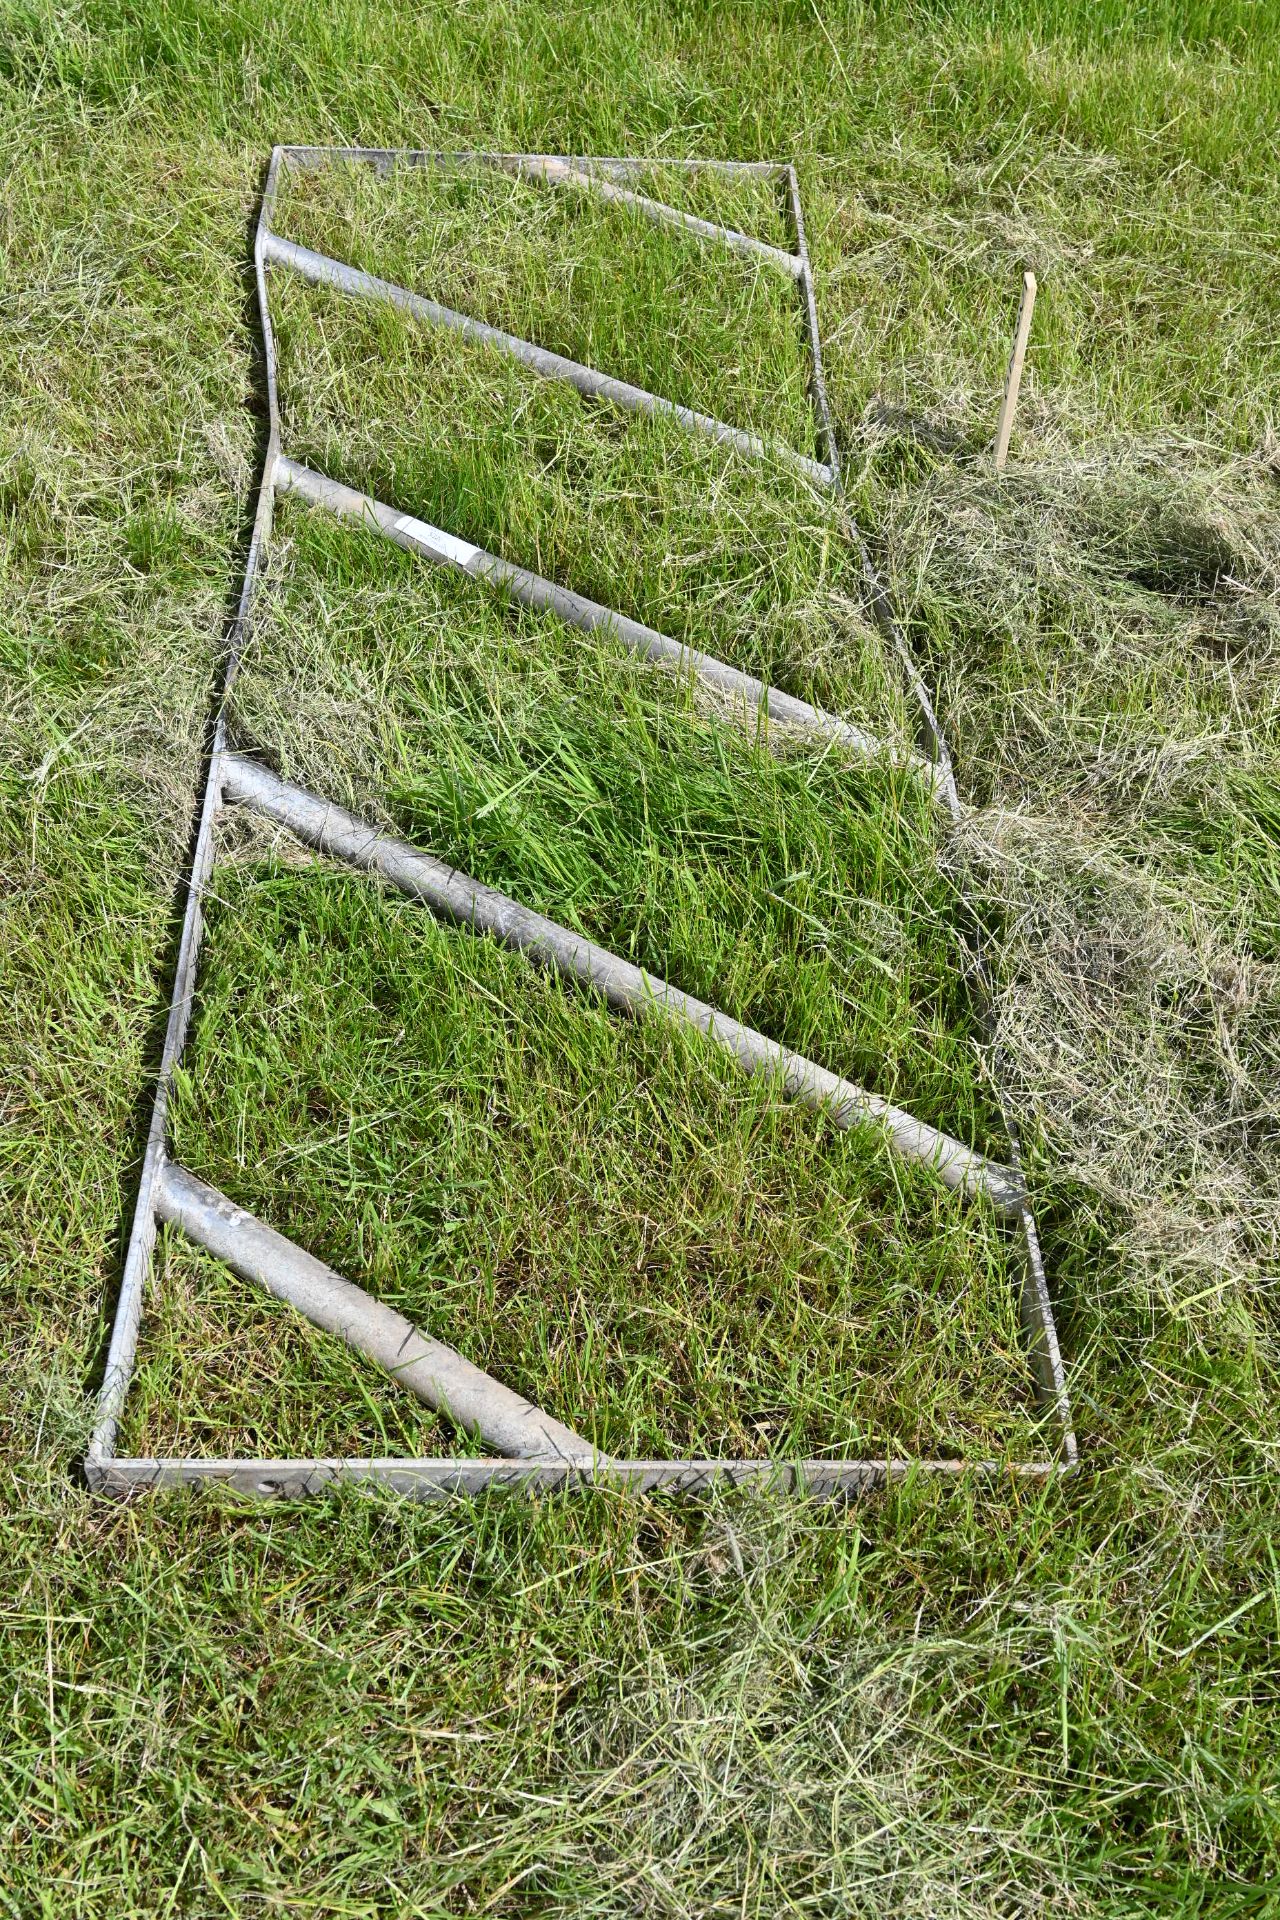 Cattle feed barrier 6 foot long galvanised. made by Luddon